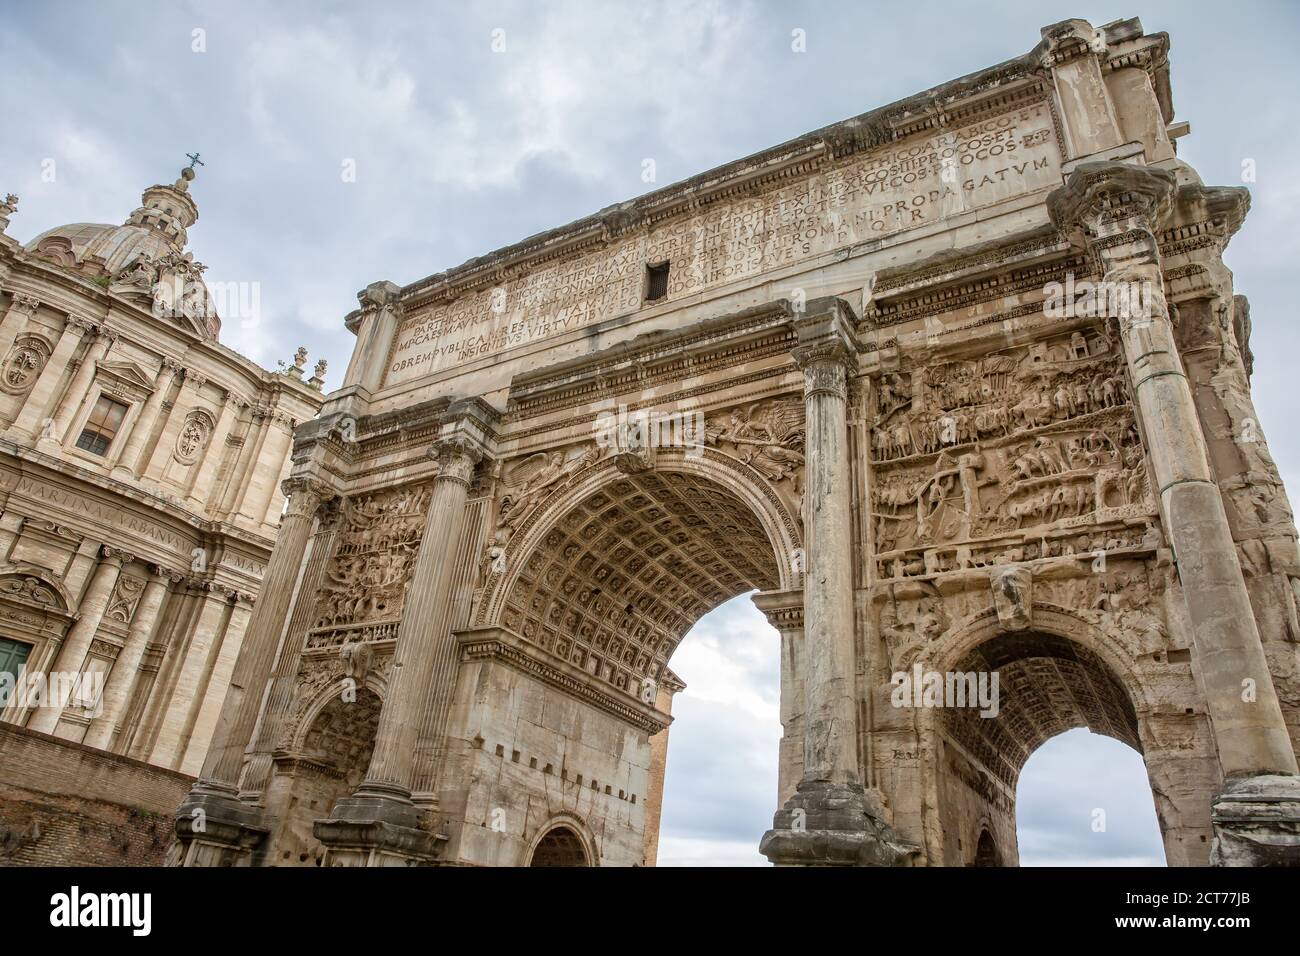 The Arch of Septimius Severus is a white marble triumphal arch. Detail from the Arch of Septimius Severus at the Forum Romanum, Rome, Italy Stock Photo